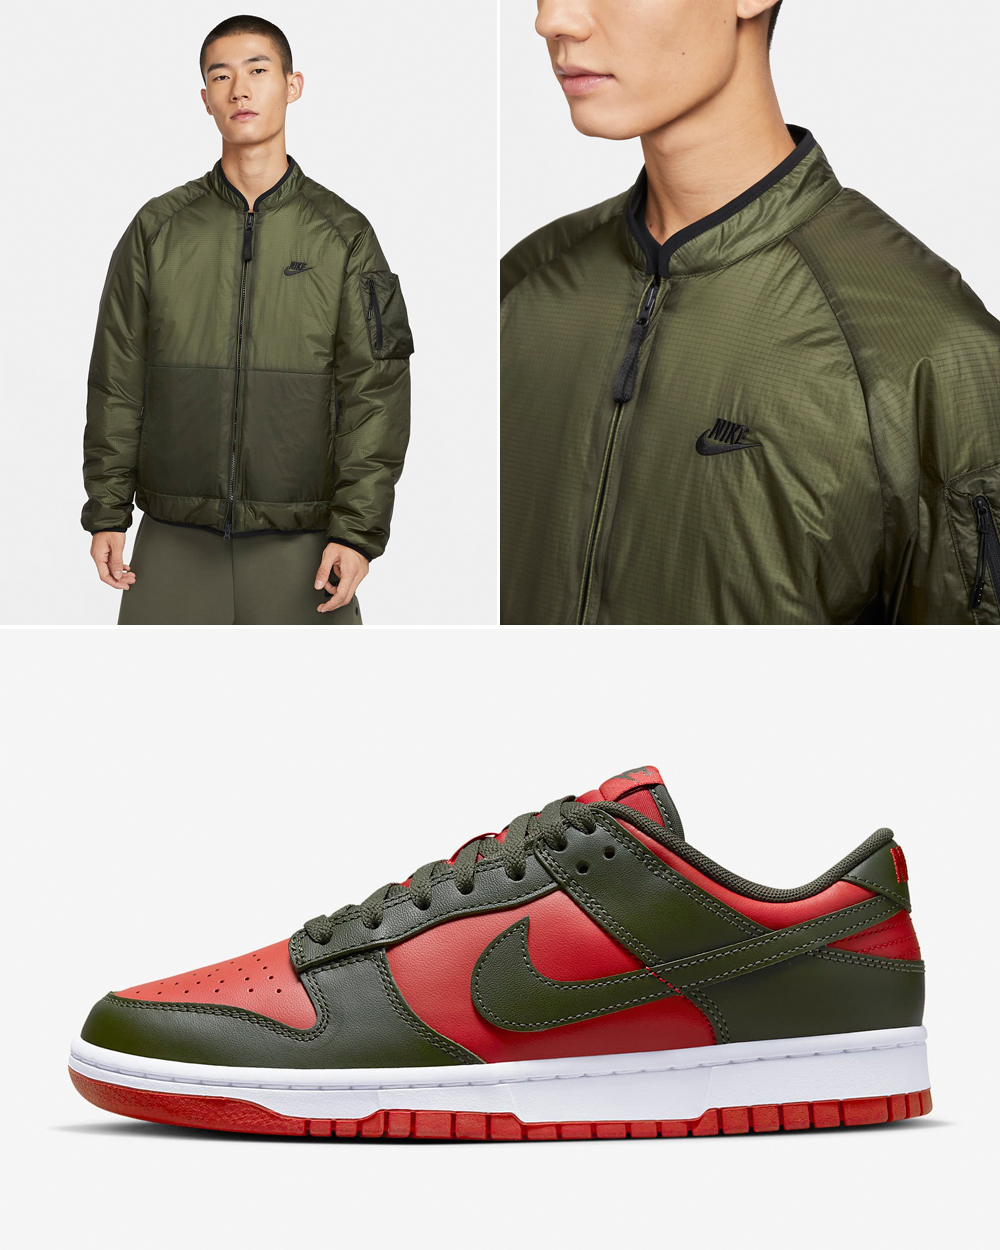 Nike-Dunk-Low-Mystic-Red-Cargo-Khaki-Jacket-Matching-Outfit